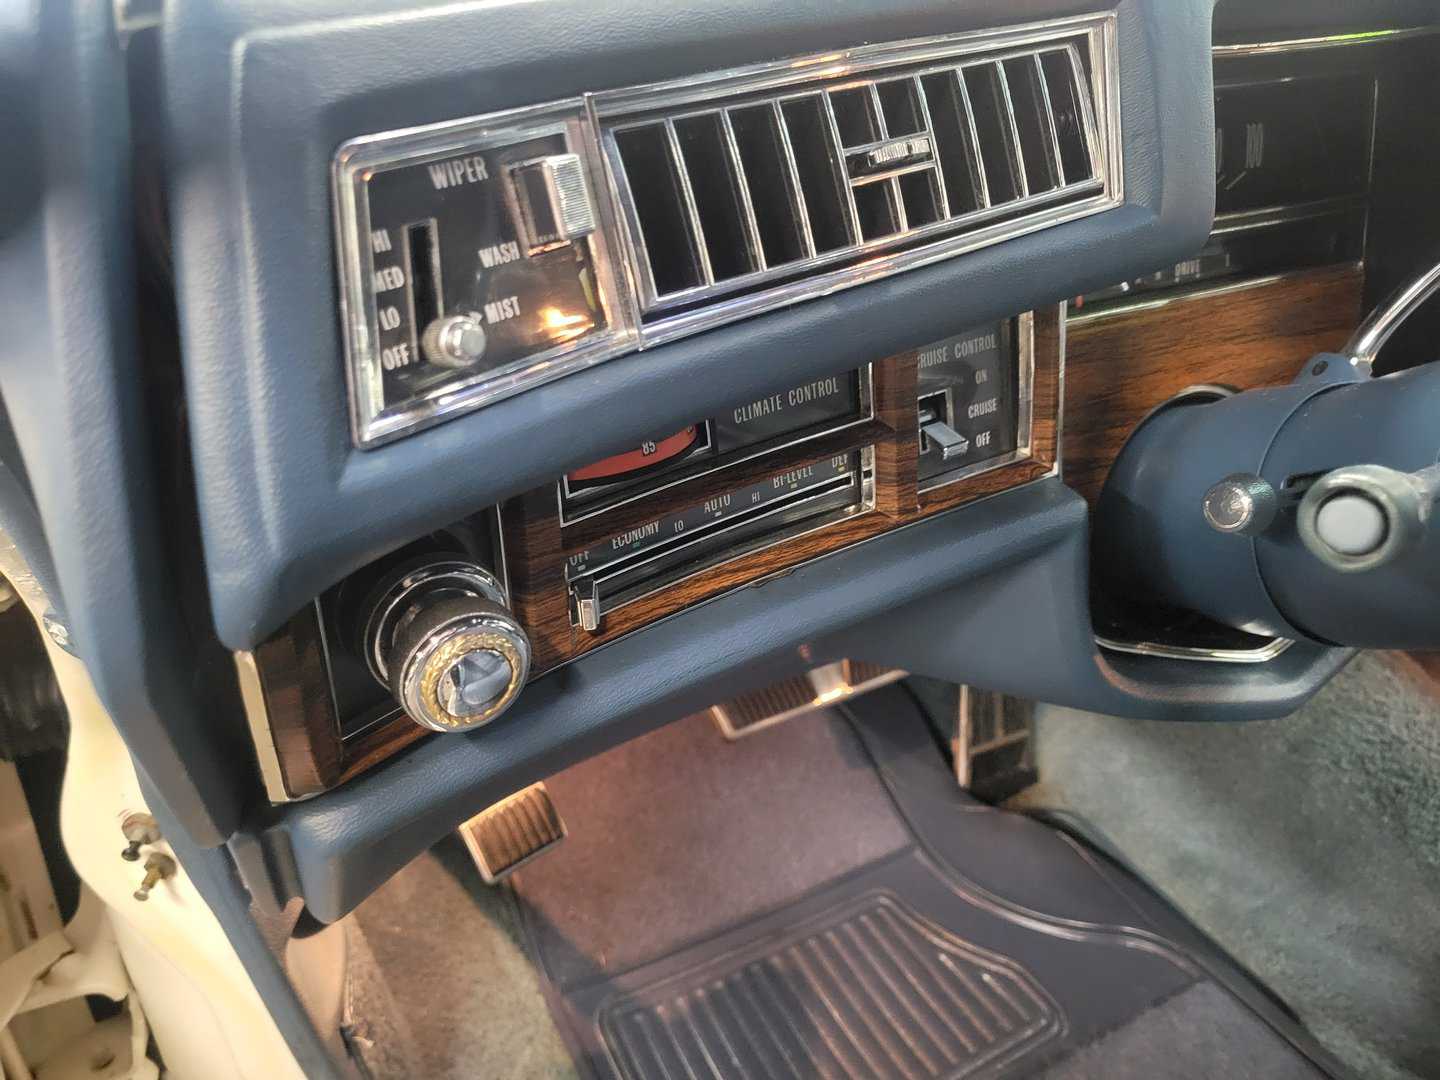 The Interior Of A Cadillac Coupe Deville With An Original Steering Wheel And Radio.